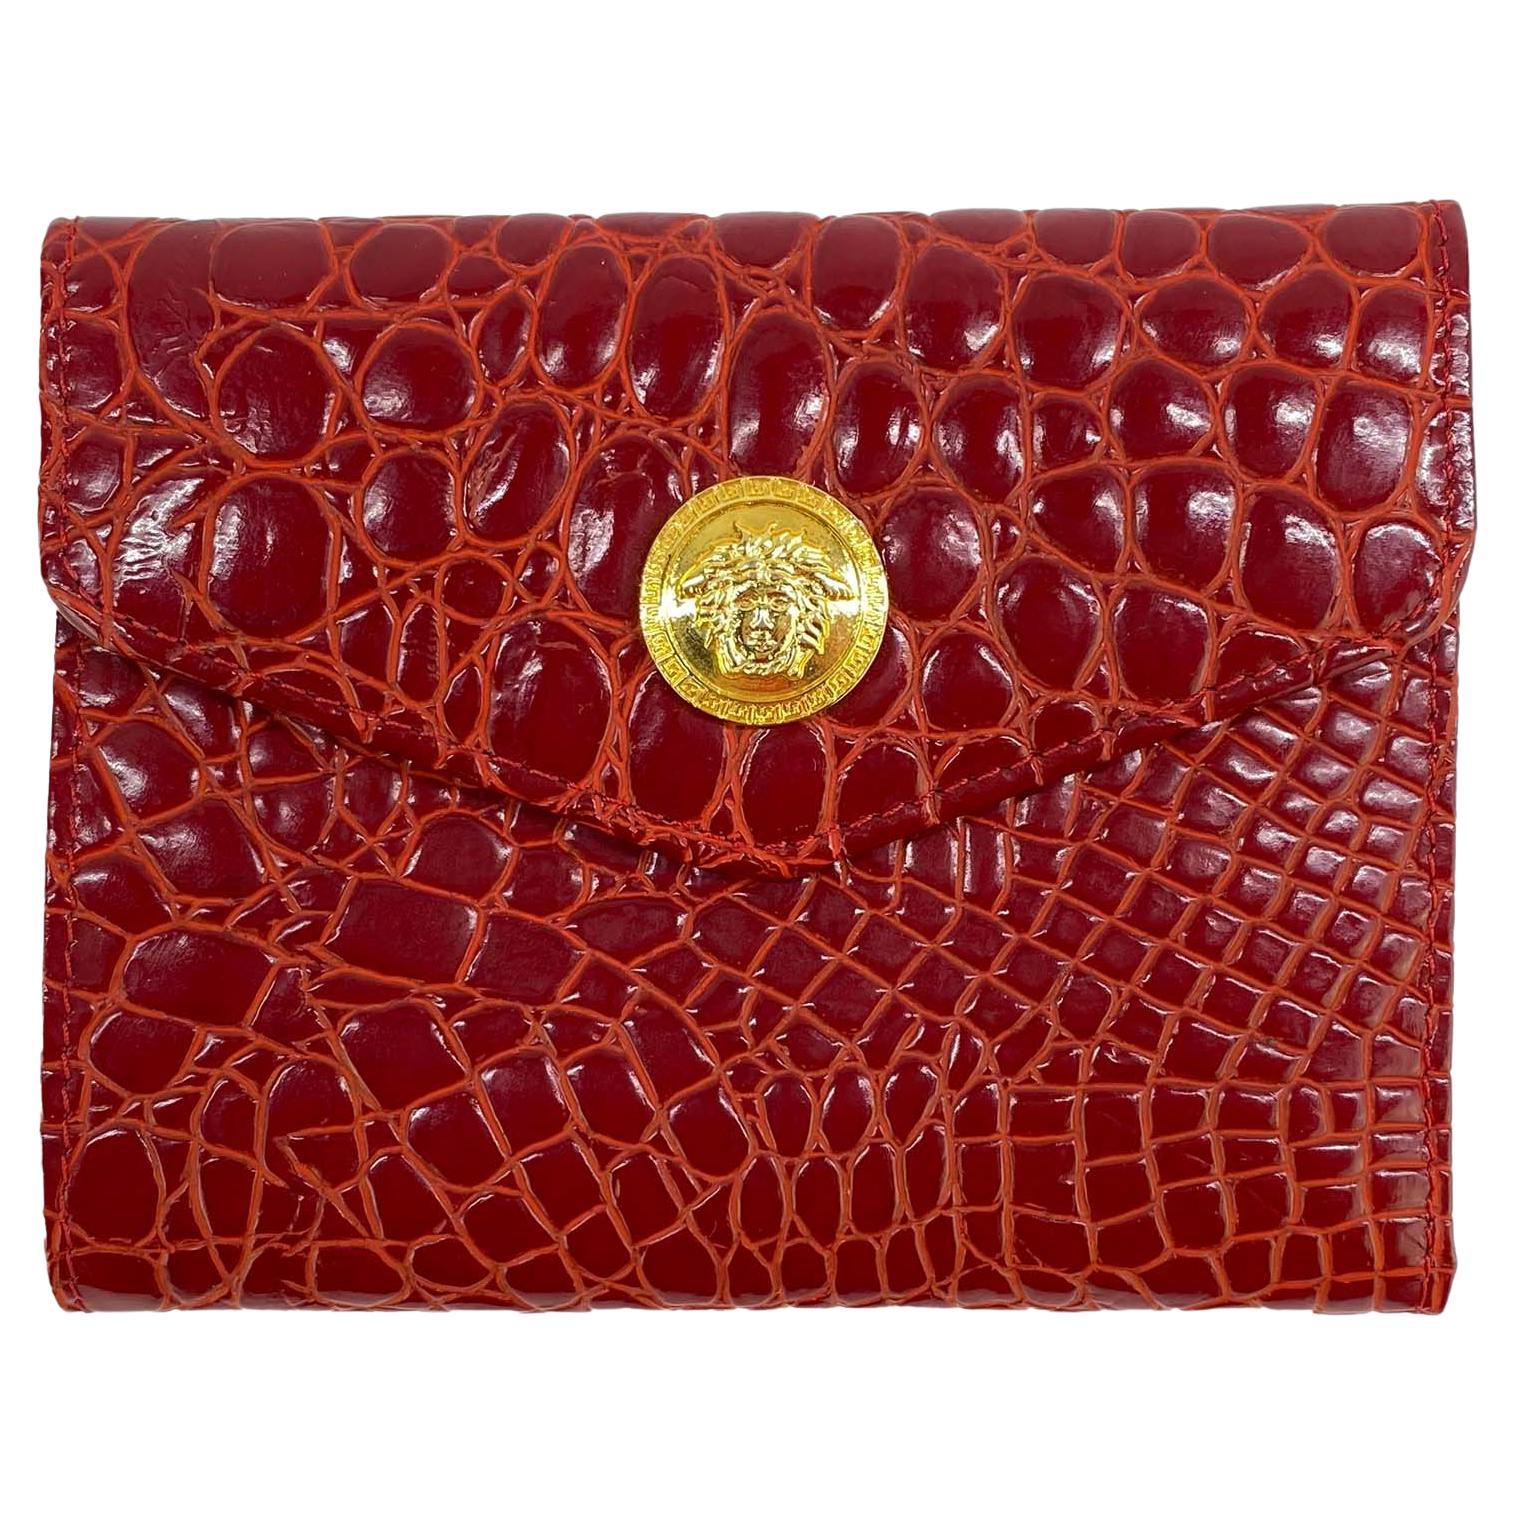 1990s Gianni Versace Red Crocodile Wallet New Old Stock For Sale